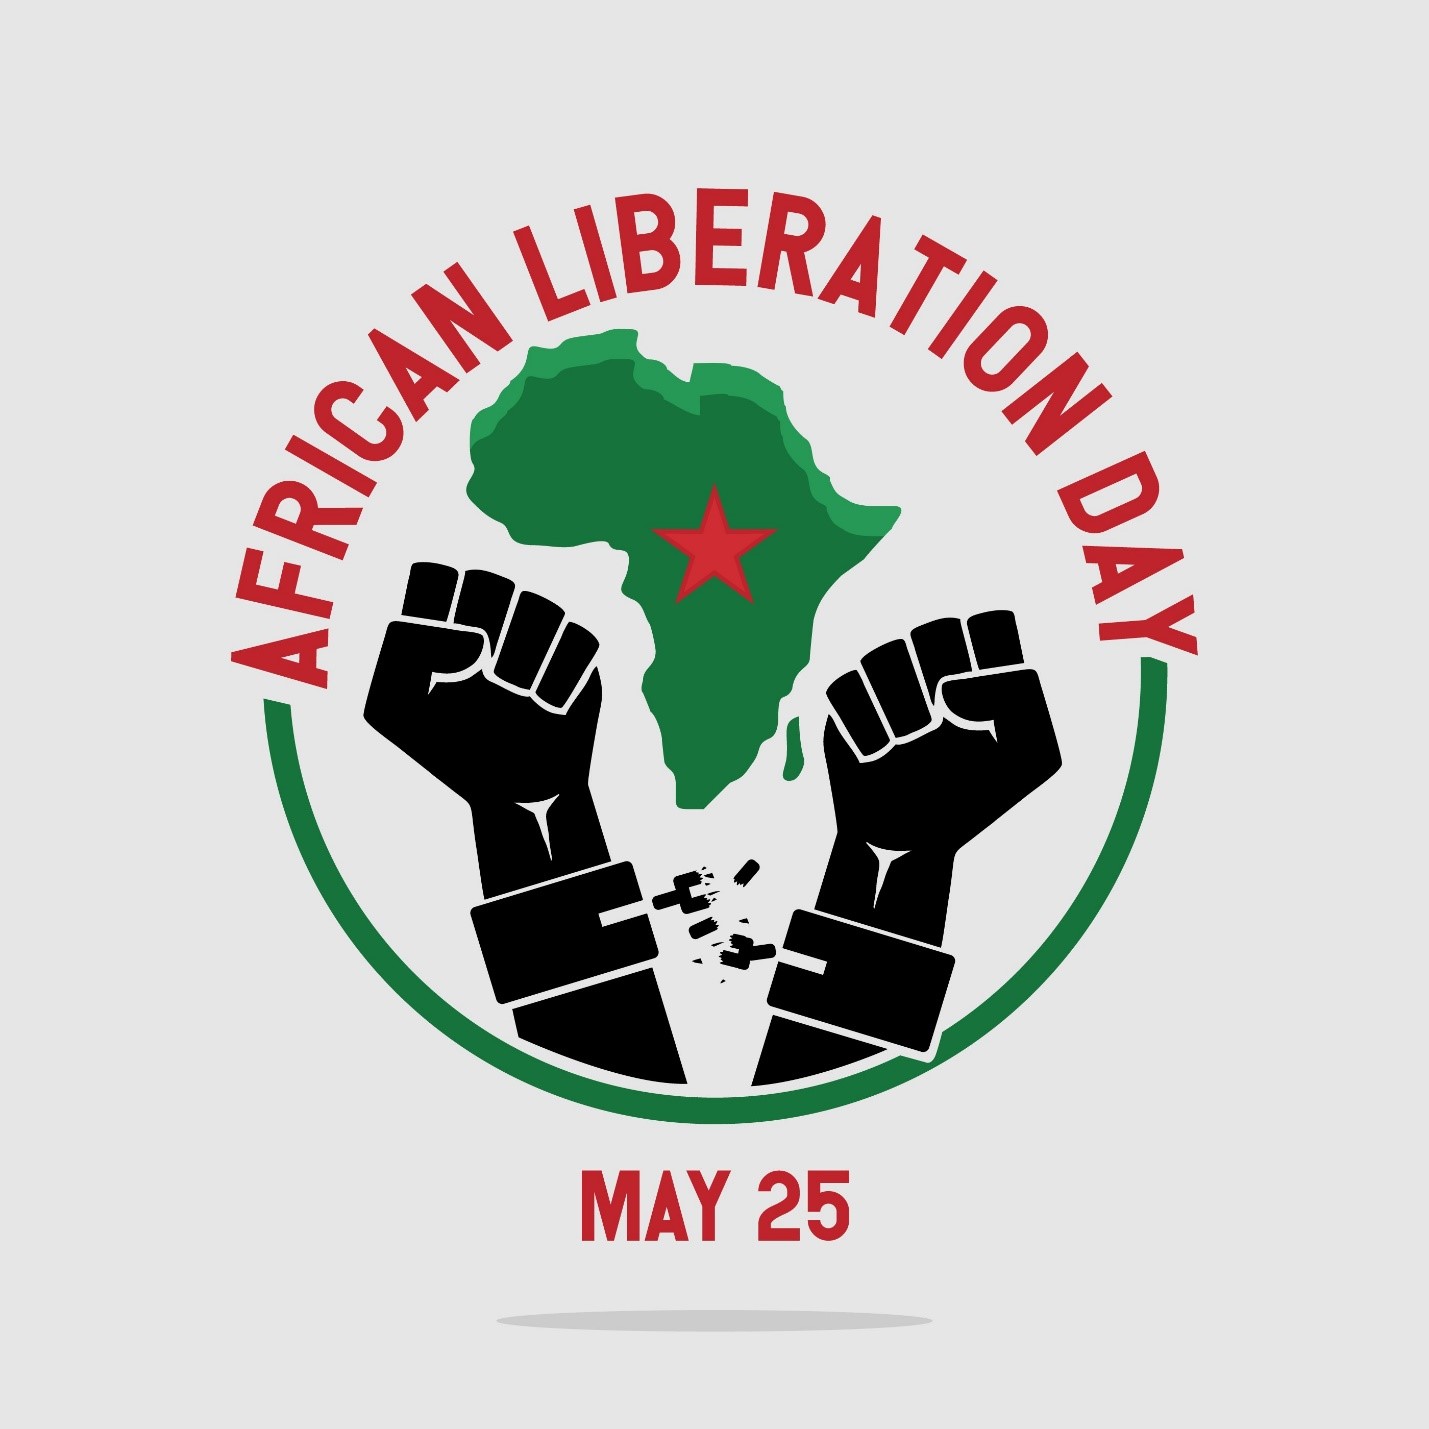 Afrikan Liberation Day: A Moment for Honest Reflection & Re-Dedication to Revolutionary Practice